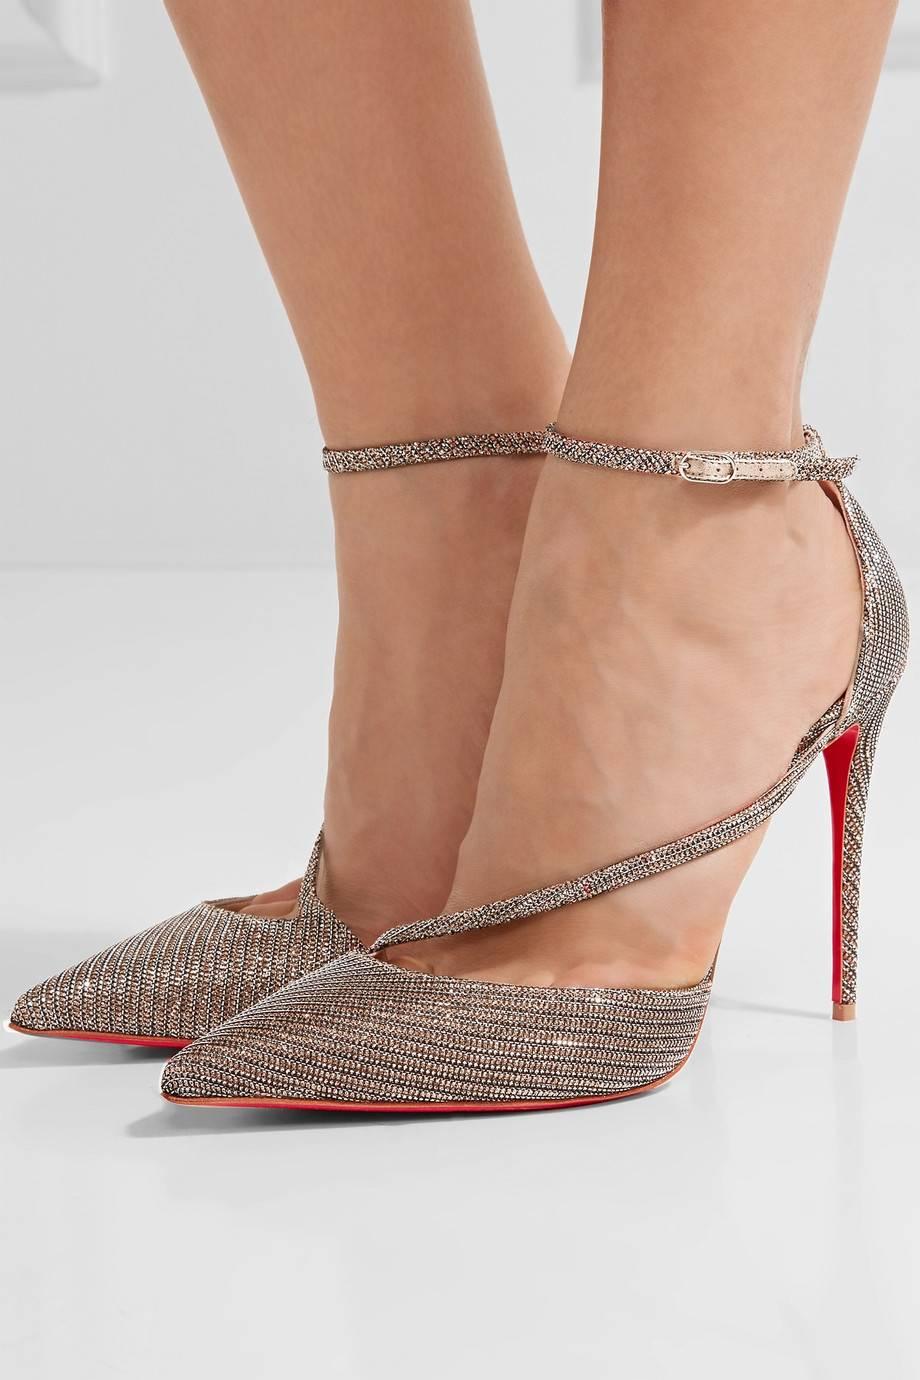 Christian Louboutin NEW Sold Out Gold Silver Glitter Criss Cross Evening Heels Pumps in Box  

Size IT 36.5
Glitter canvas 
Ankle buckle closure 
Made in Italy 
Heel height 4" (100mm) 
Includes original Christian Louboutin dust bag and box